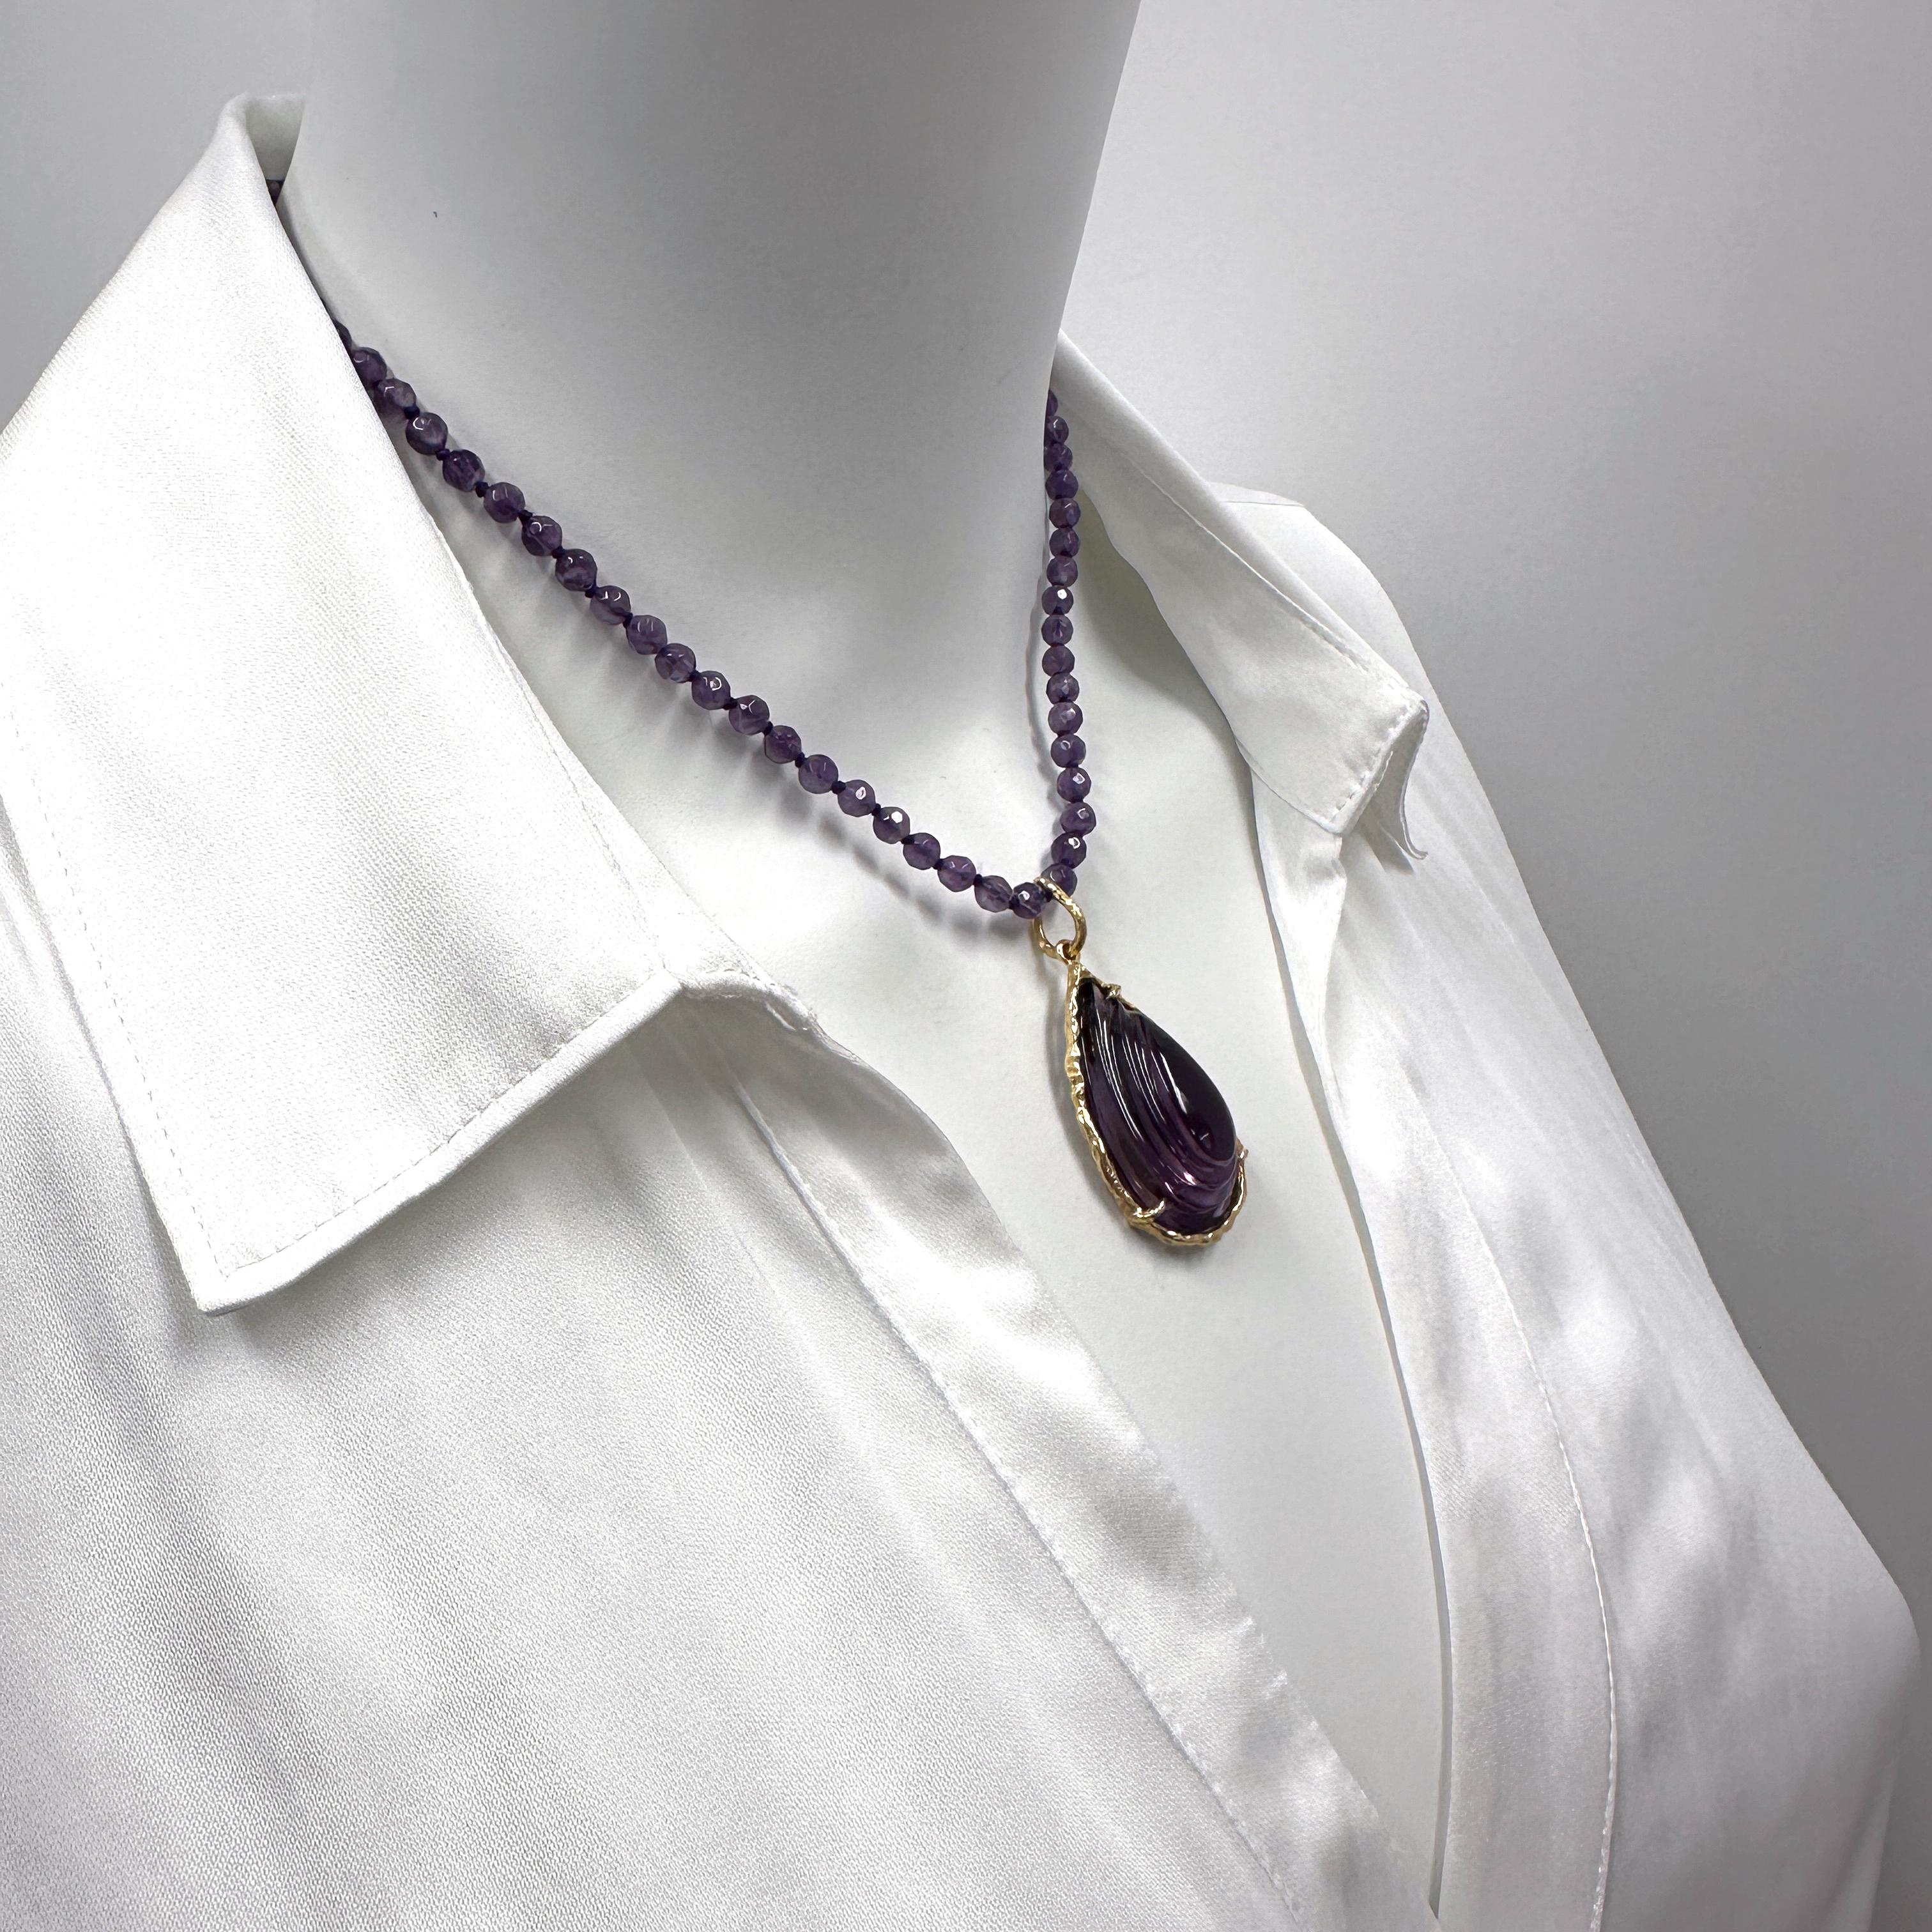 Women's or Men's 39 Carat Carved Amethyst Pendant in 18K Gold on Convertible Amethyst Bead Chain For Sale